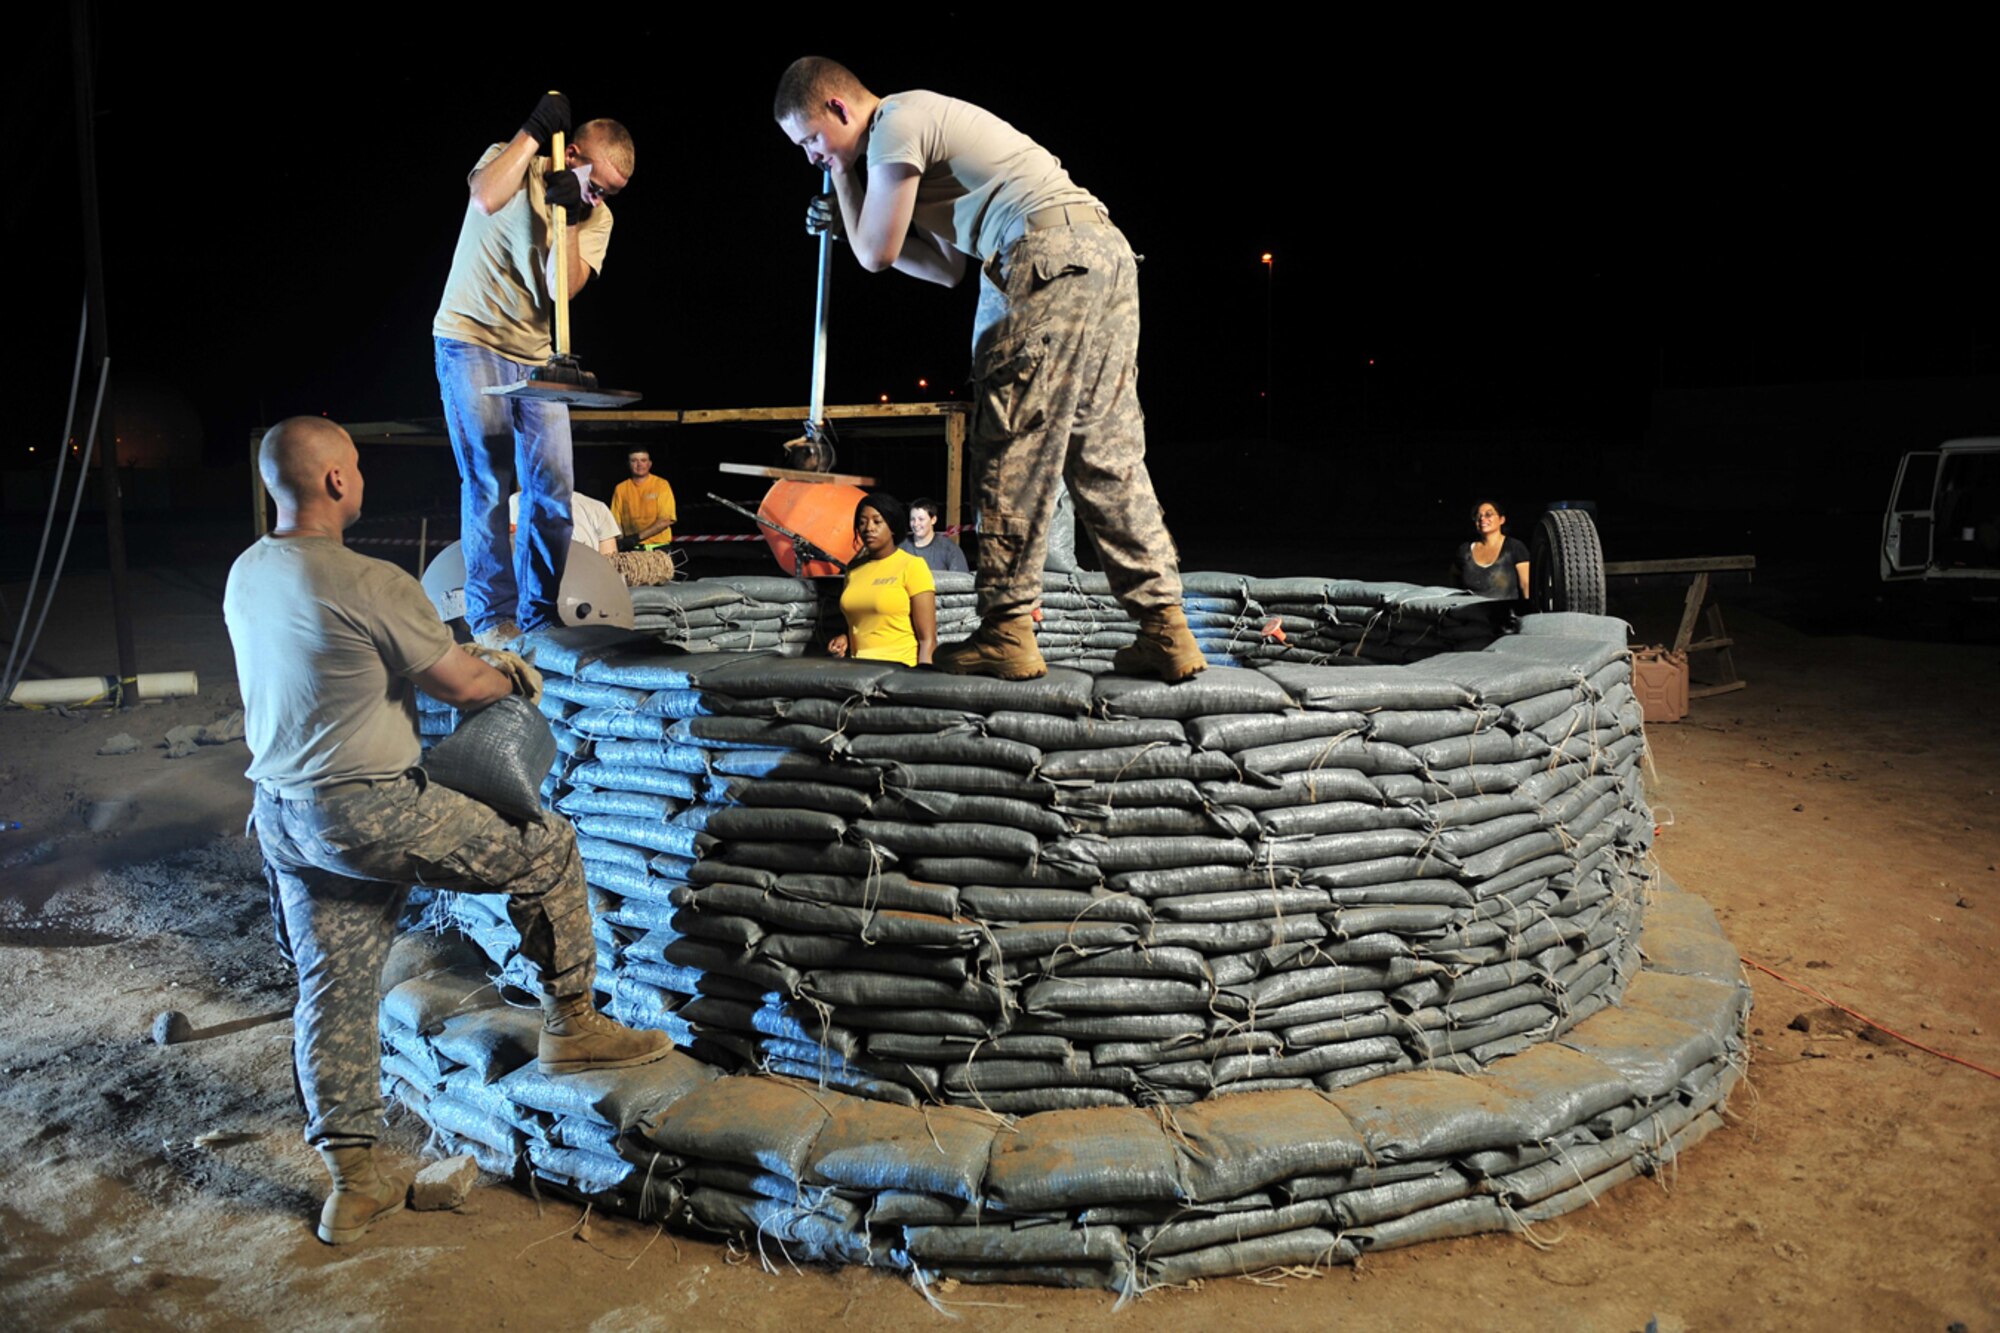 Members of Combined Joint Task Force-Horn of Africa and the 418th Civil Affairs Battalion construct an Eco-Dome prototype Aug. 27, 2010, at Camp Lemonnier, Djibouti. The Eco-Dome provides comfortable, economical and sustainable building solutions for impoverished and natural disaster stricken-areas. The goal of the task force is to help African nations build capability so they can promote regional security and stability, prevent conflict and protect U.S. and coalition interests. (U.S. Air Force photo/Staff Sgt. Kathrine McDowell)